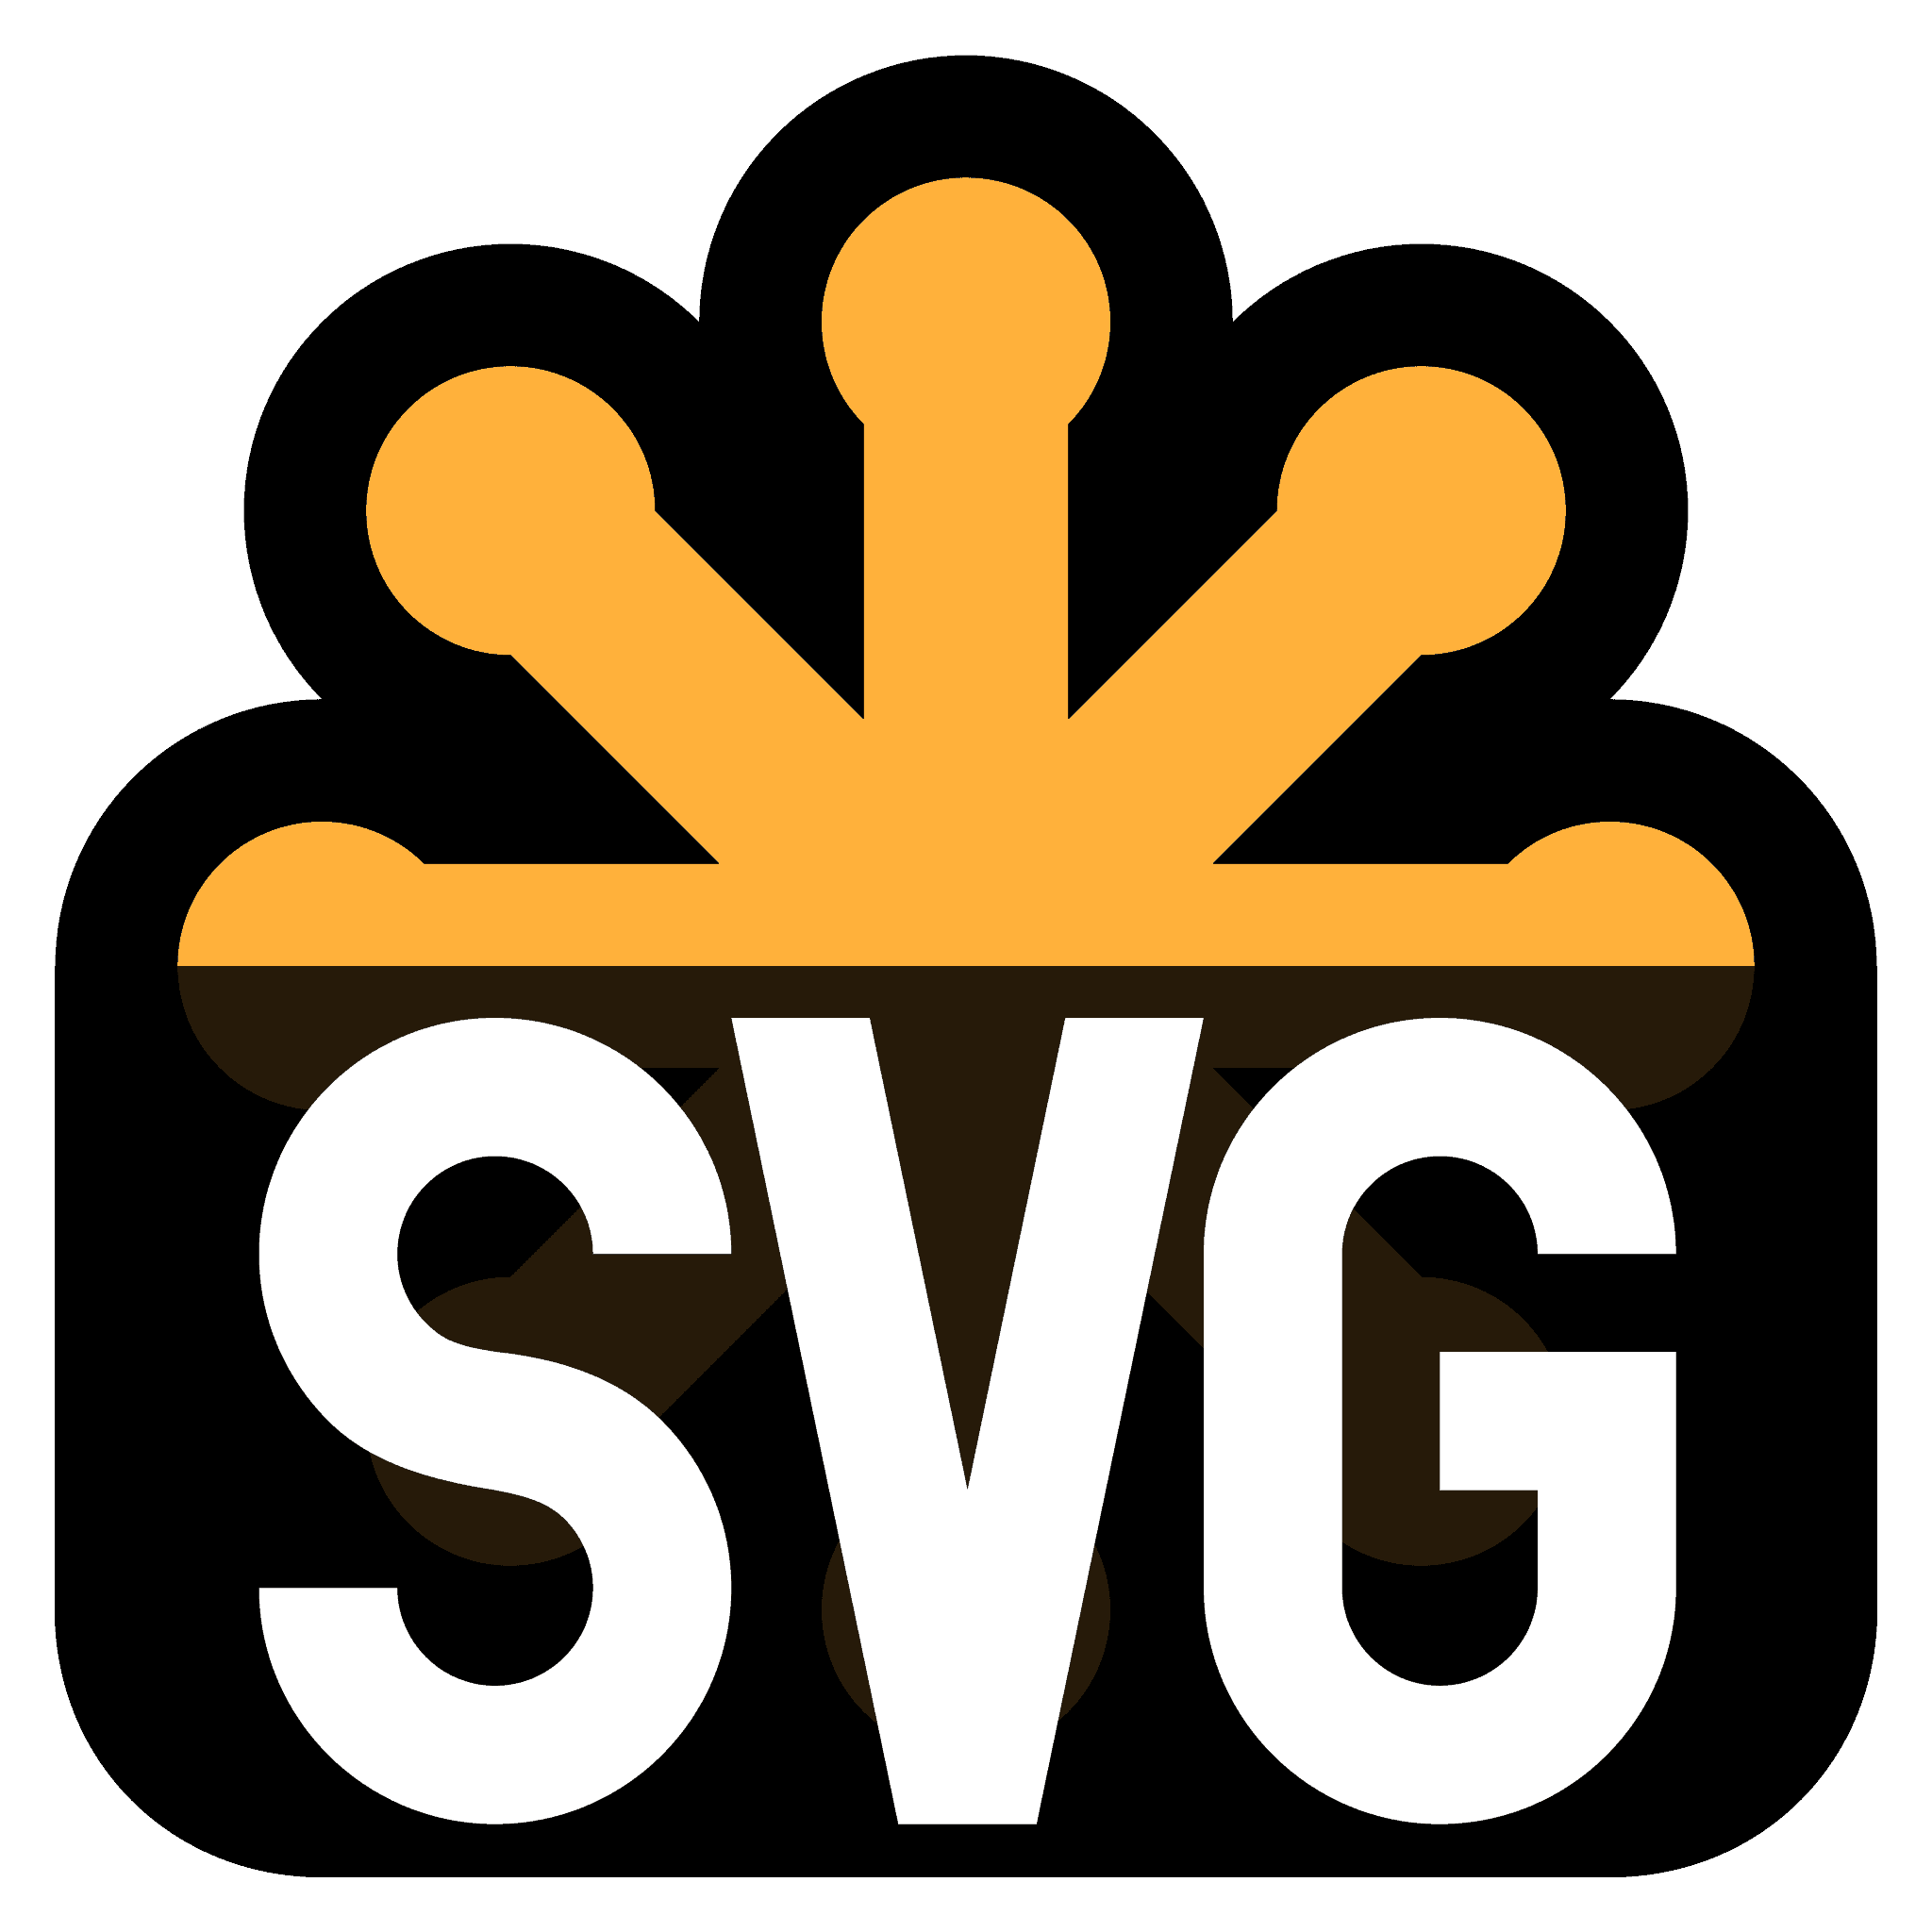 PNG to SVG converter  Convert PNG to SVG online with custom editing